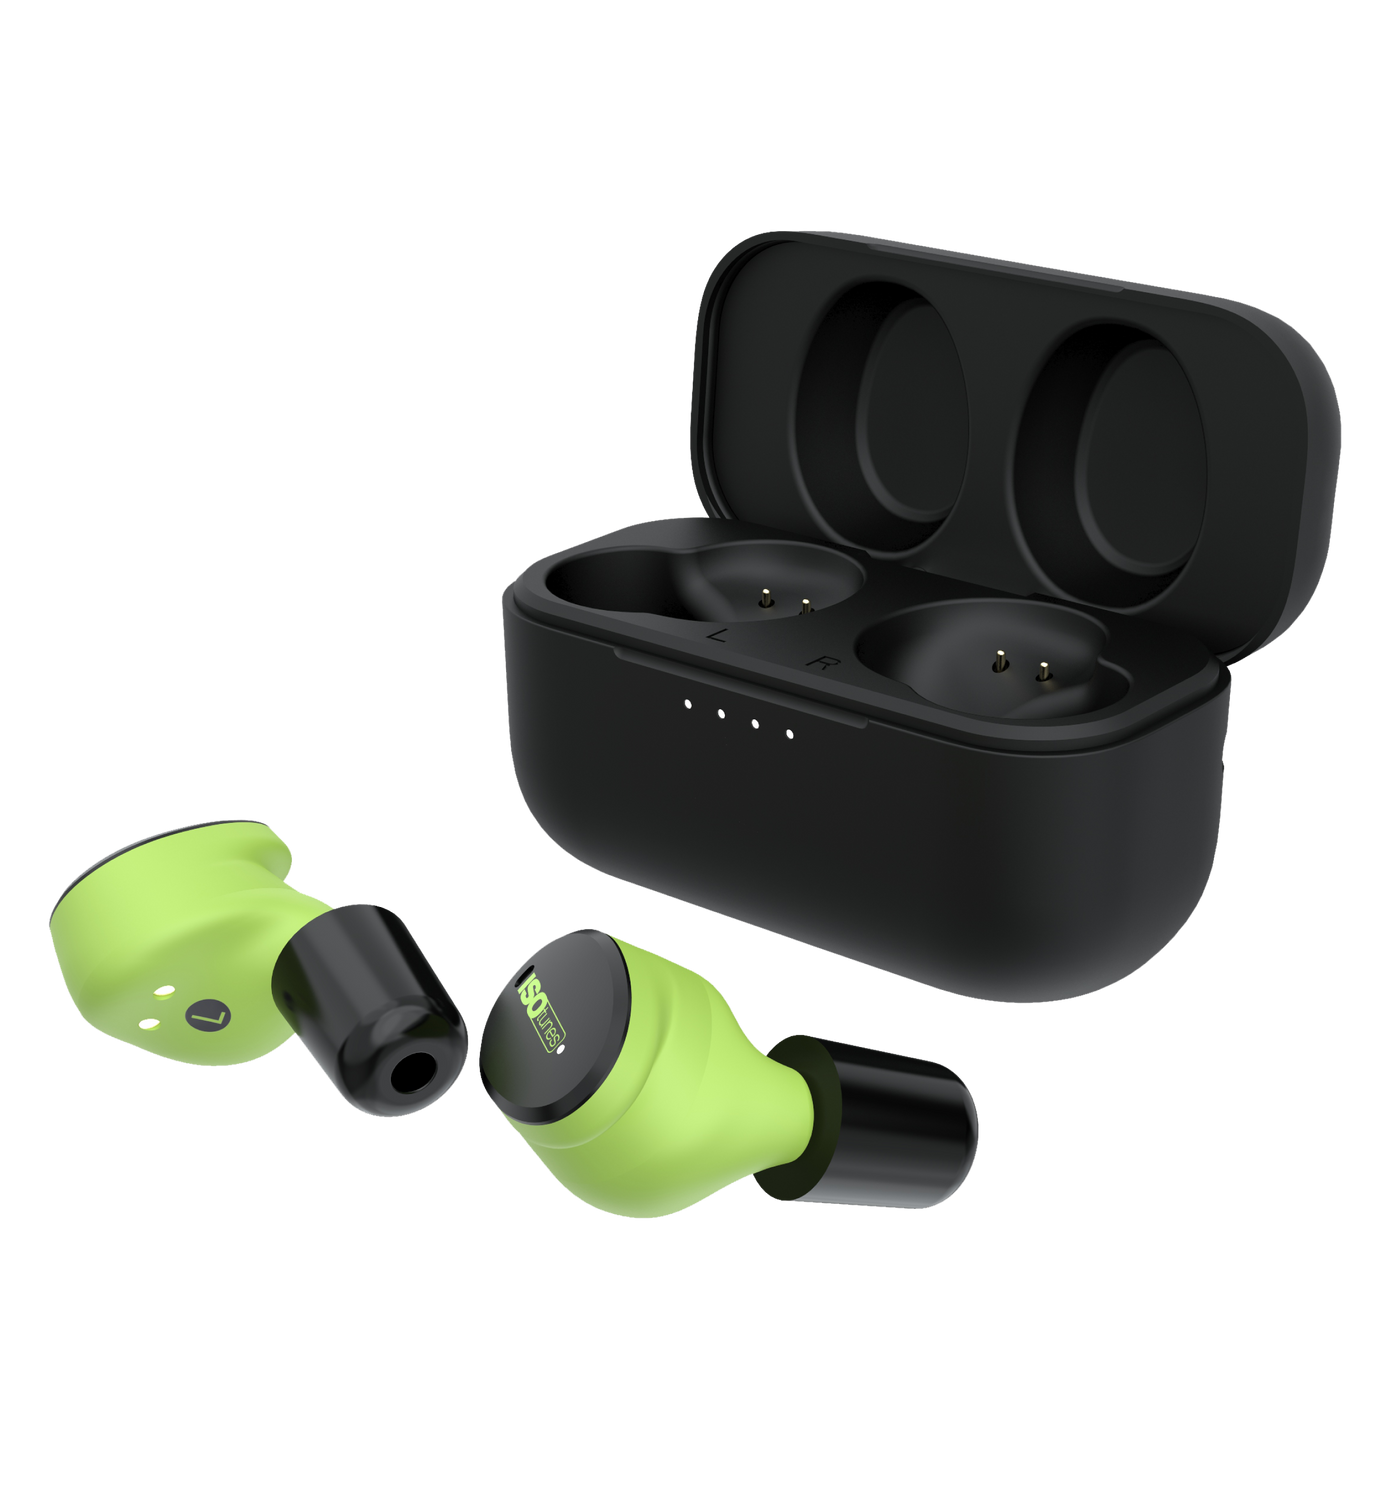 FREE Aware earbuds and charging case